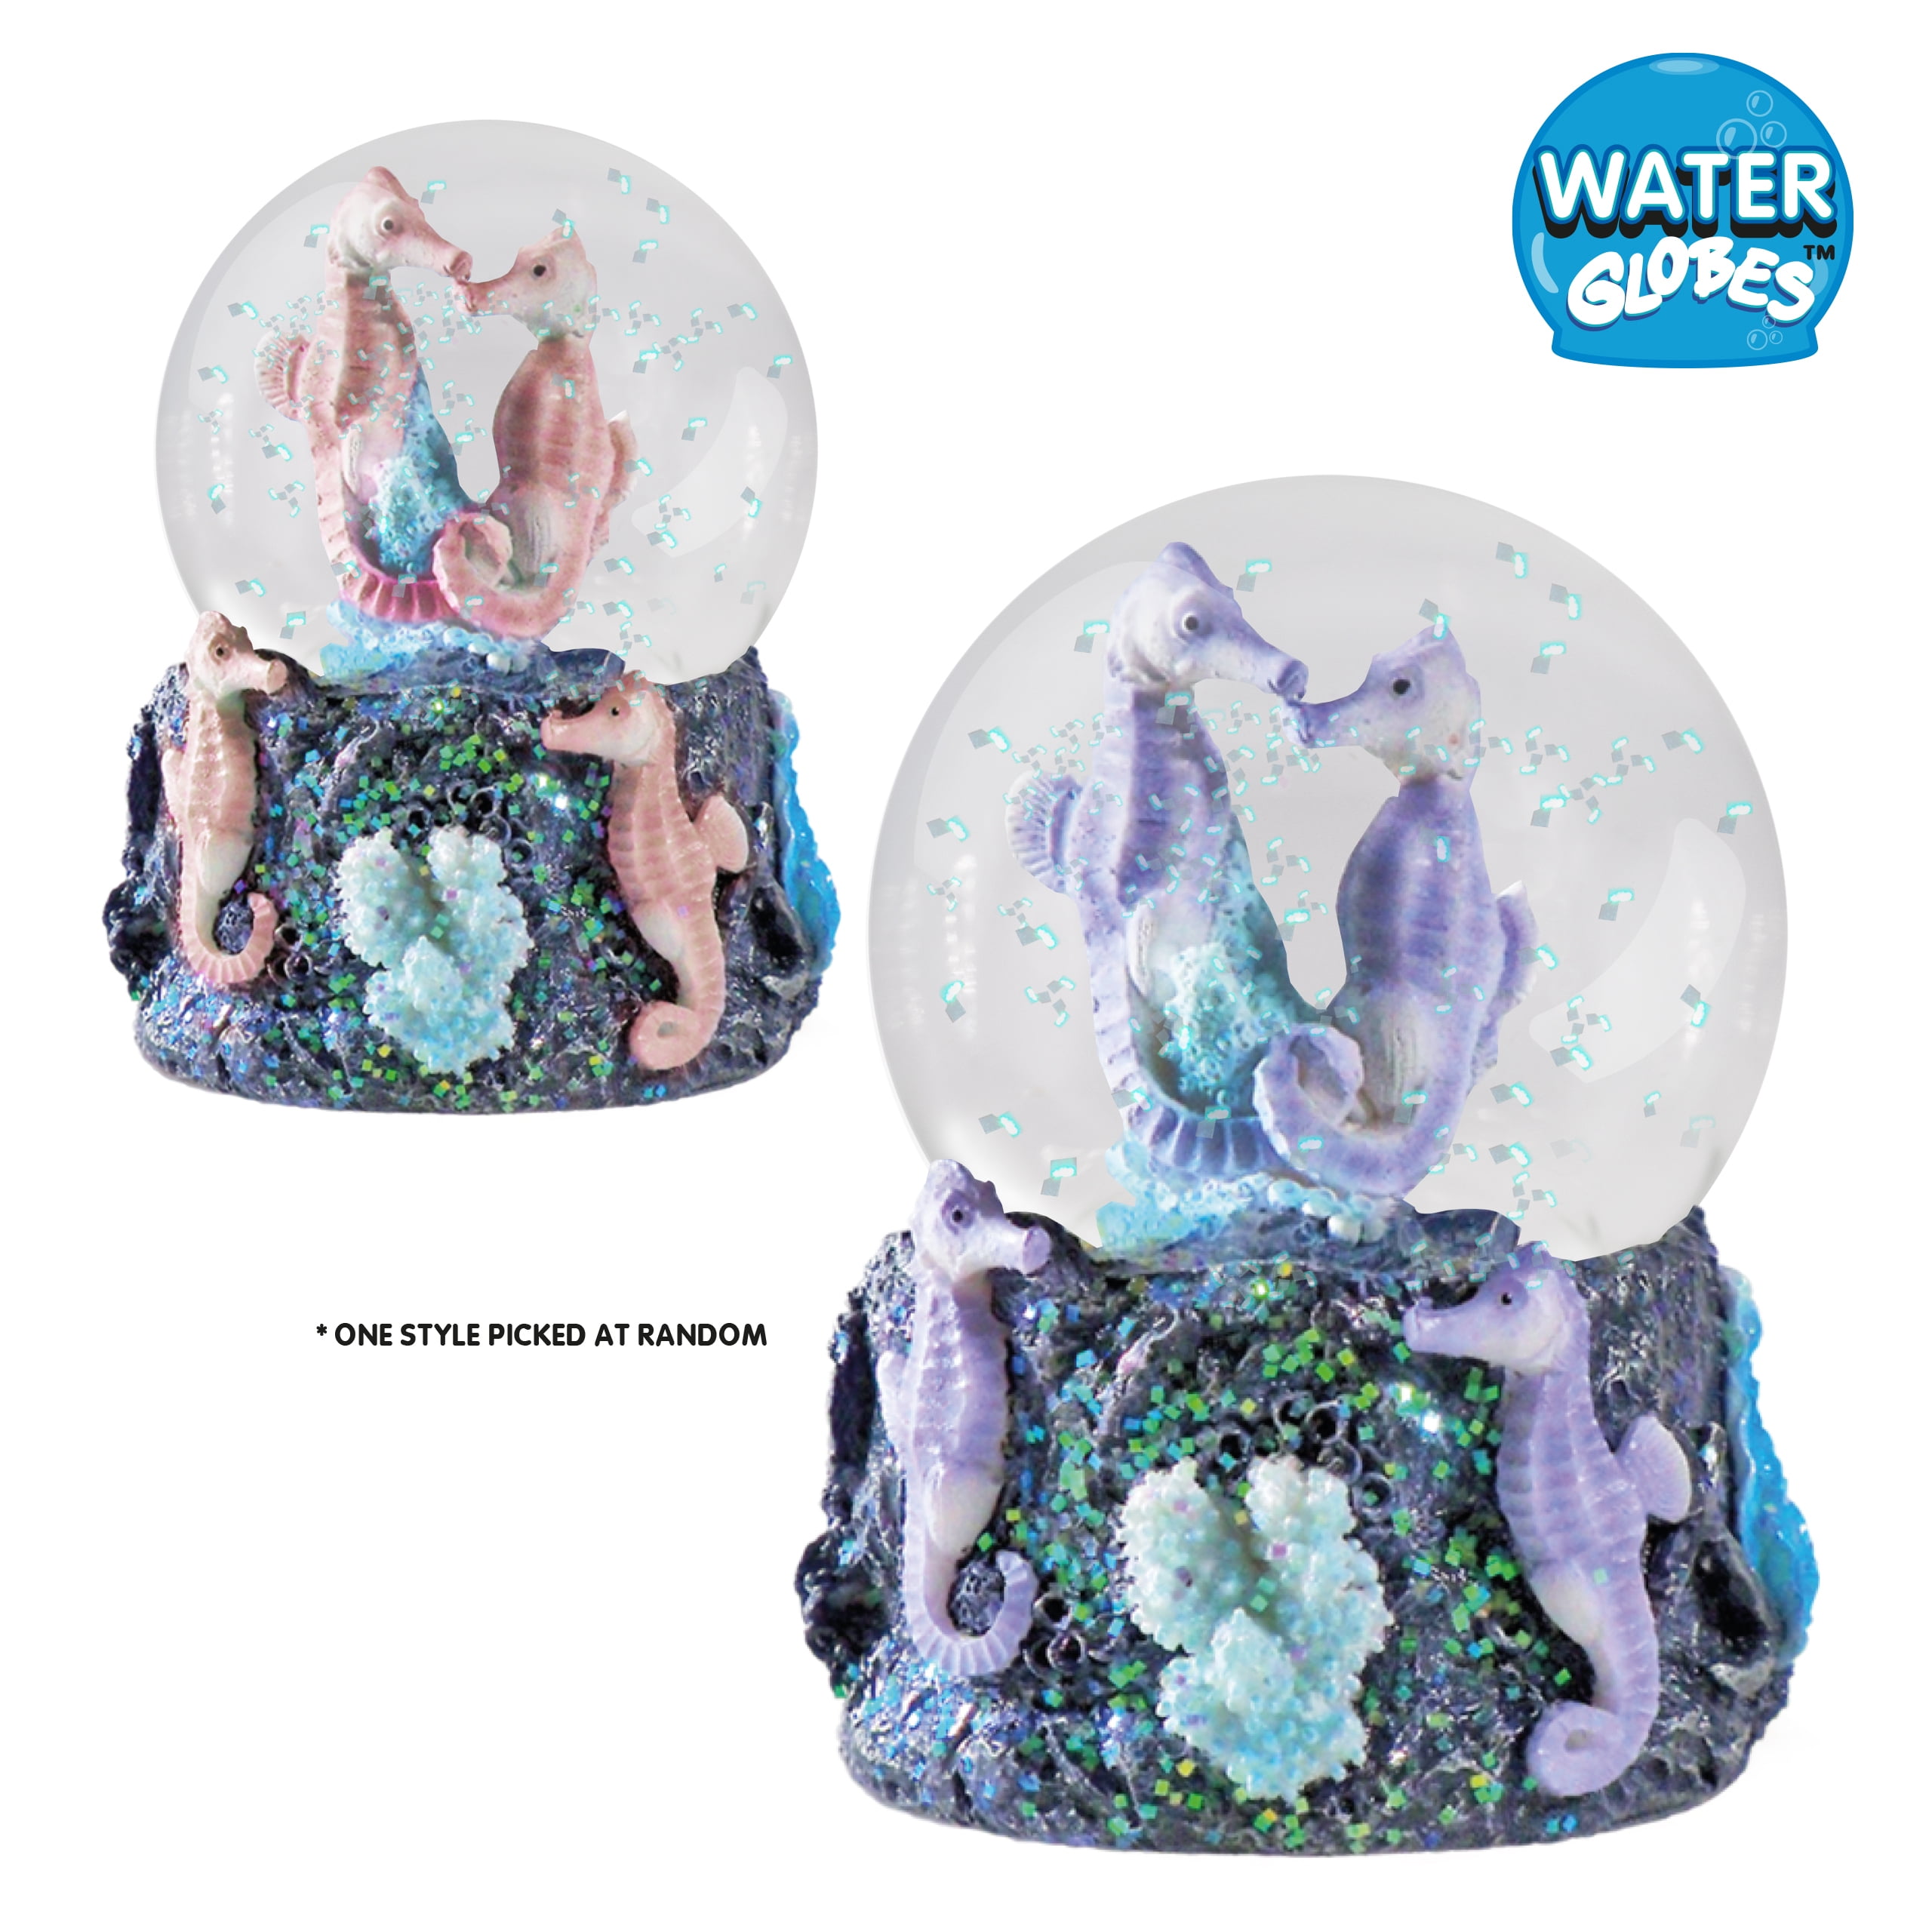 Water Globe - Seahorses from Deluxebase. Snow Globe Animal Decor with  Seahorse Figurines. Glass Glitter Globe with Resin Figurines and Molded  Base.